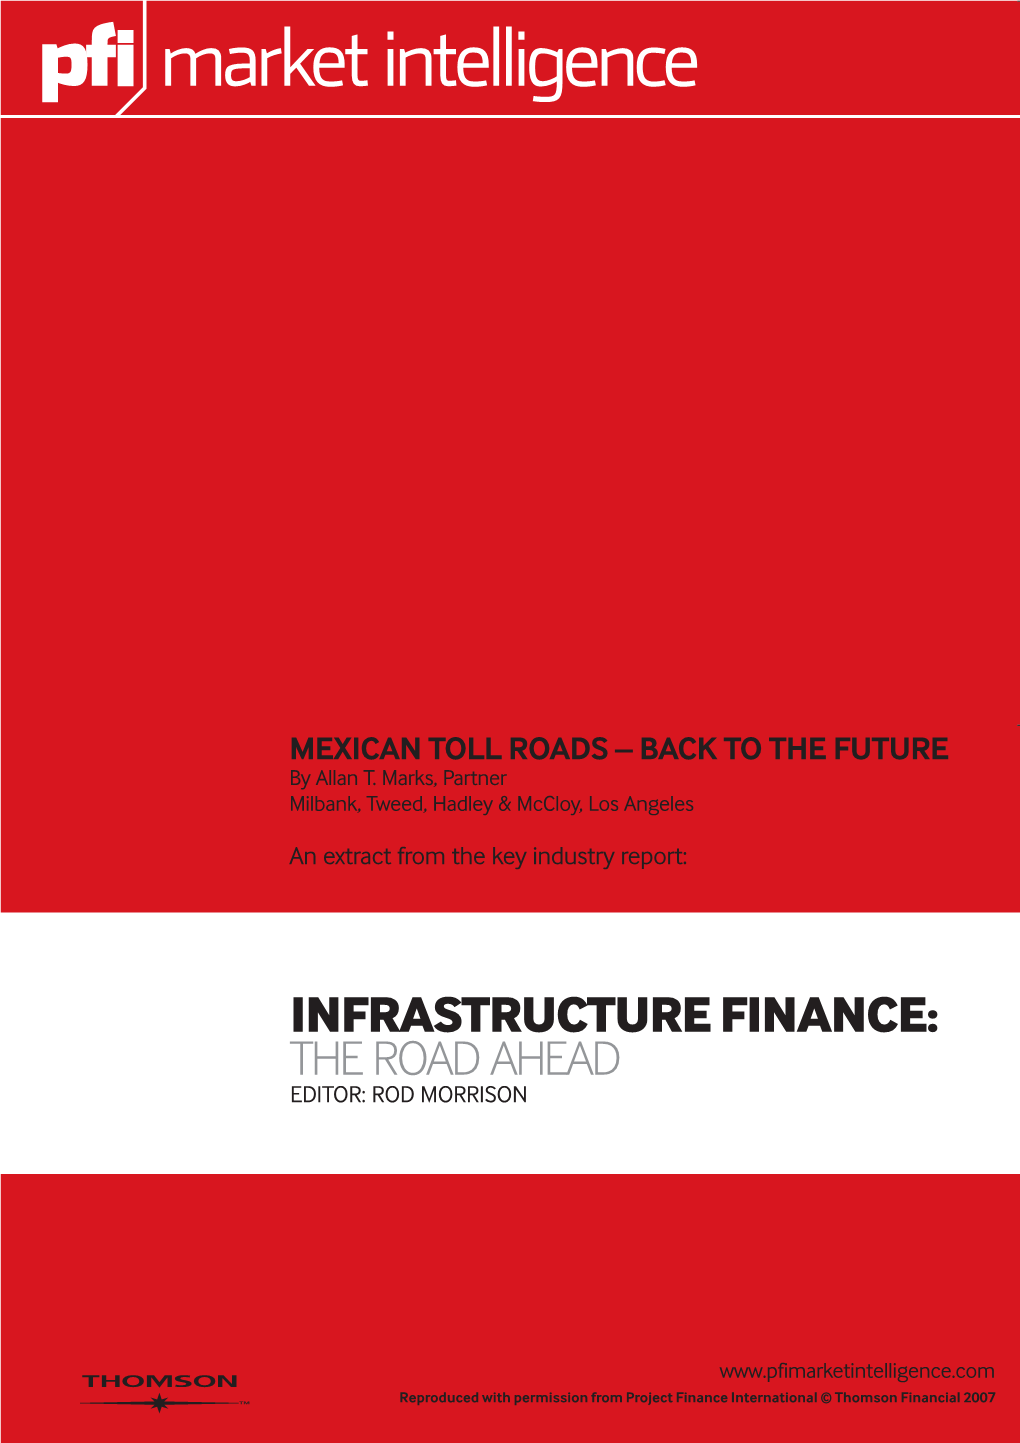 MEXICAN TOLL ROADS – BACK to the FUTURE by Allan T